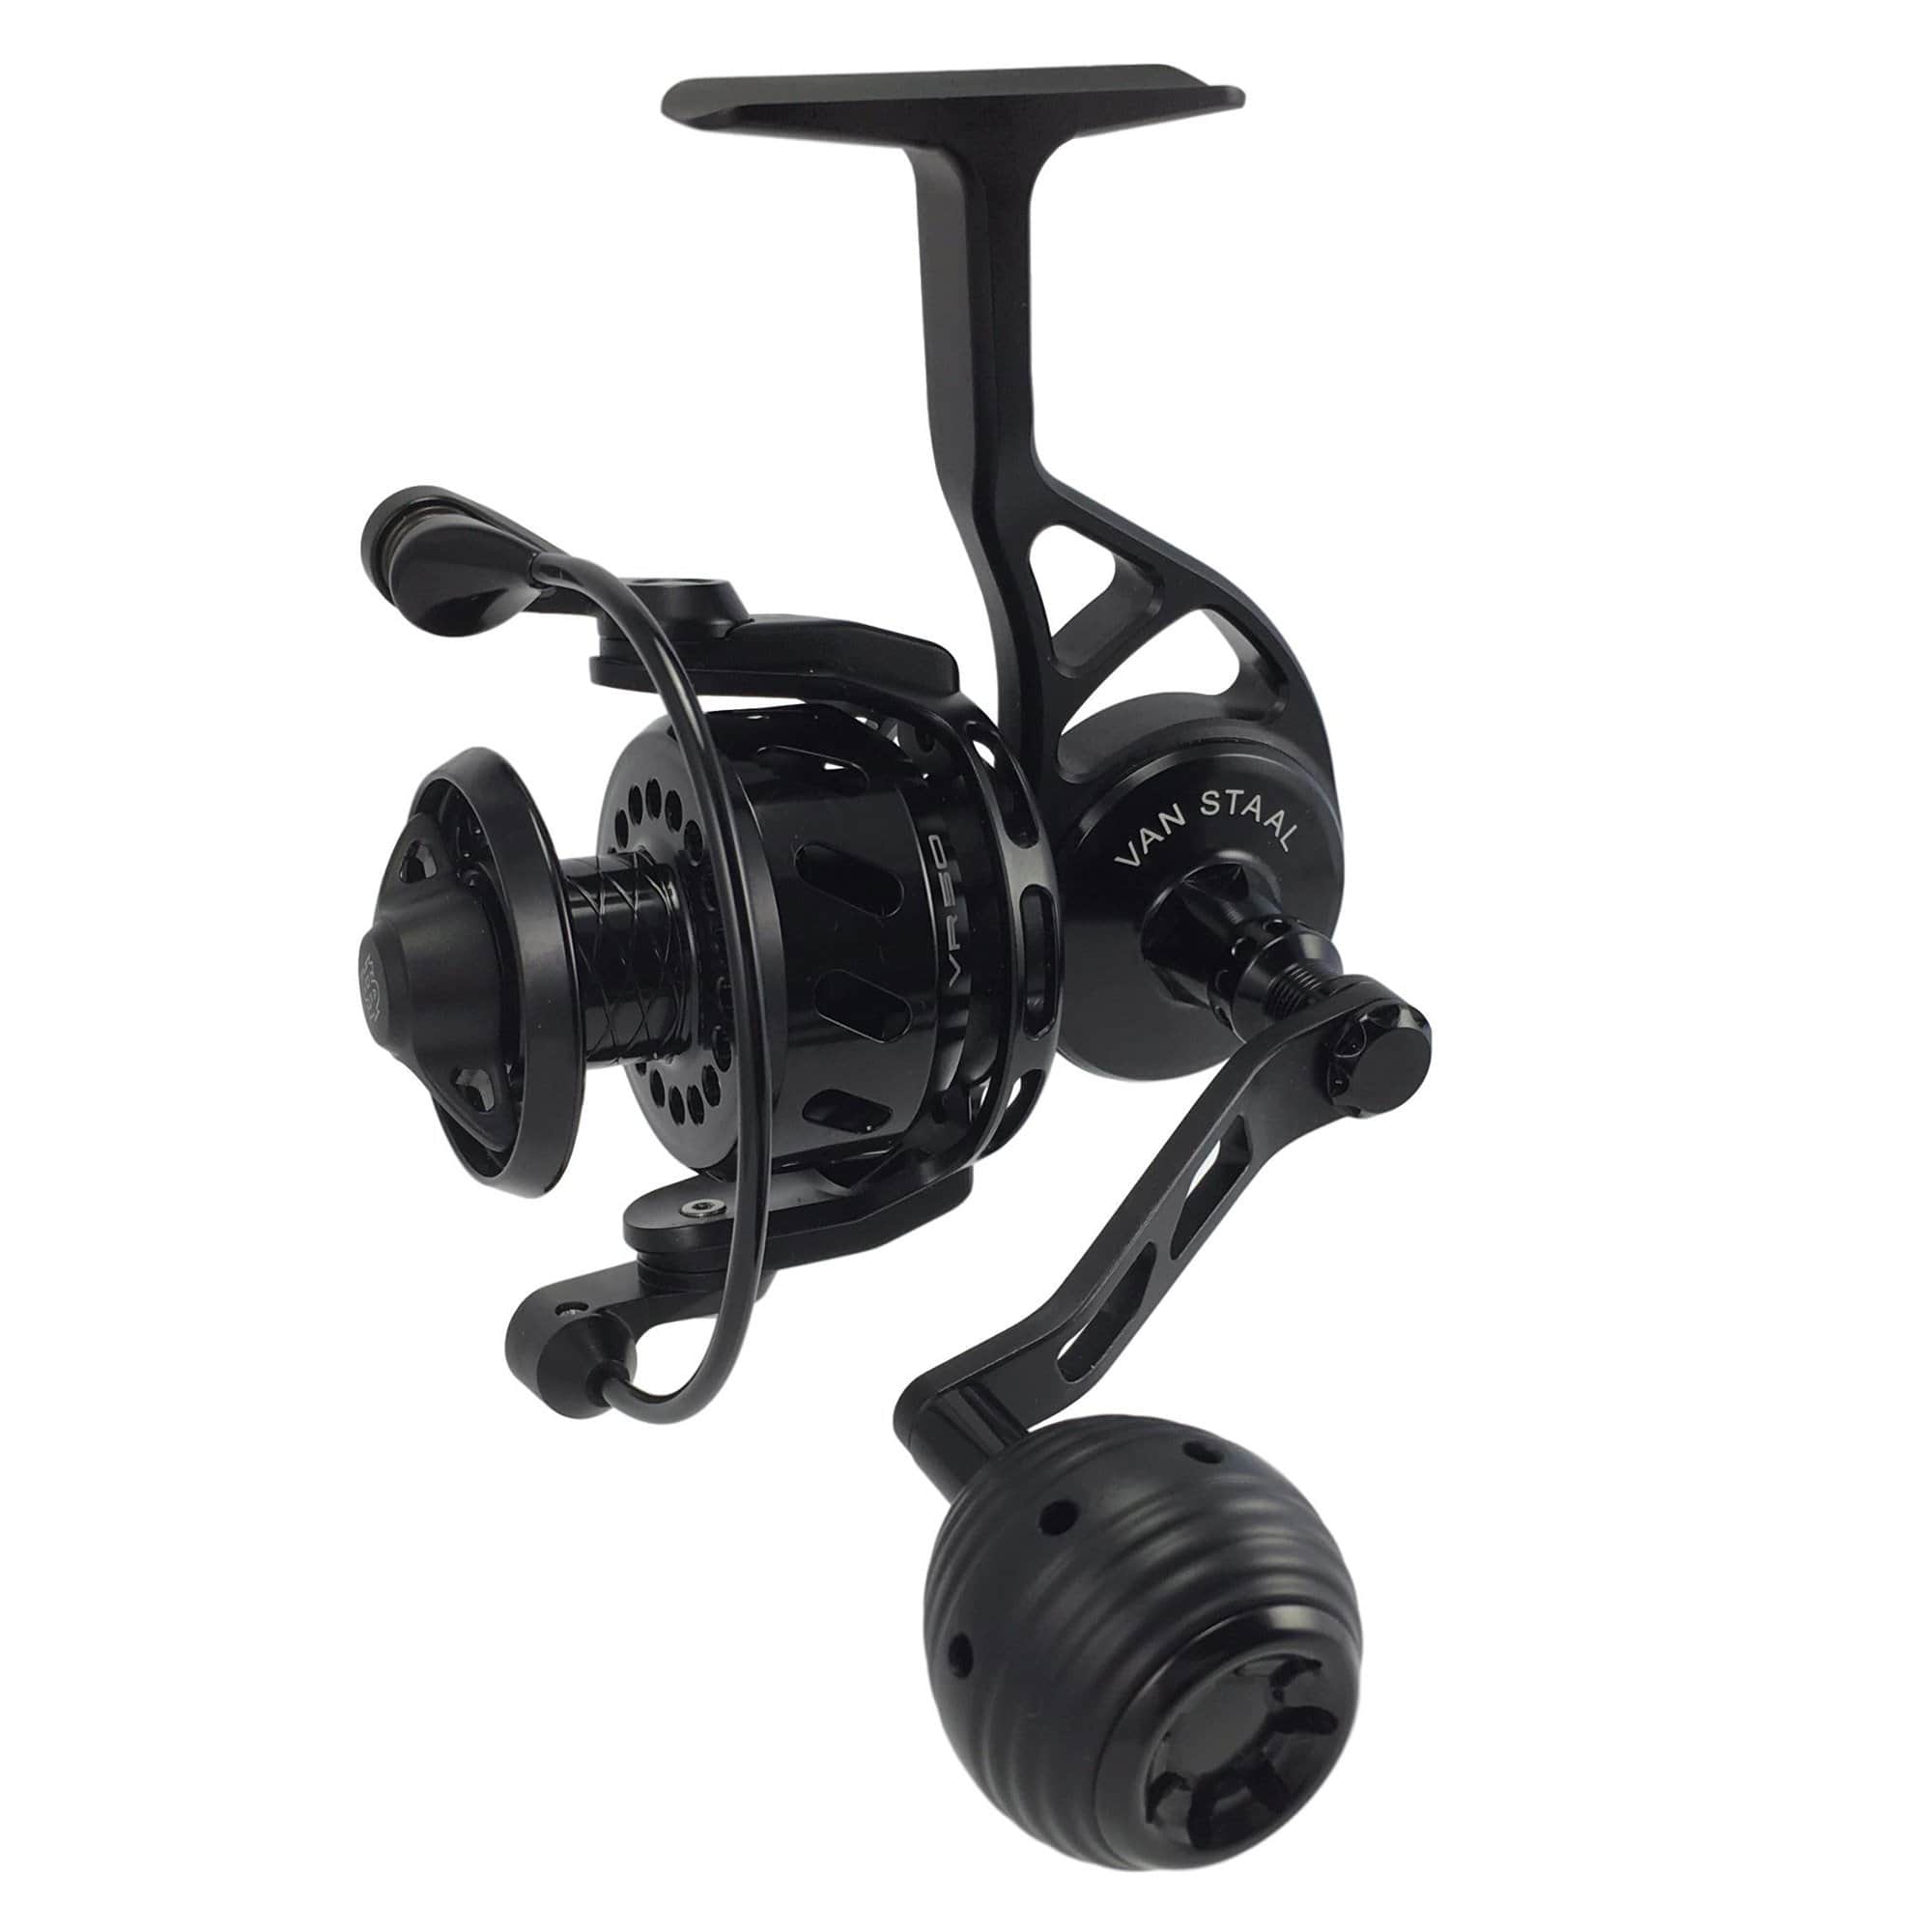 Black Van Staal VR75 Spinning Reels are back in stock! We have them in